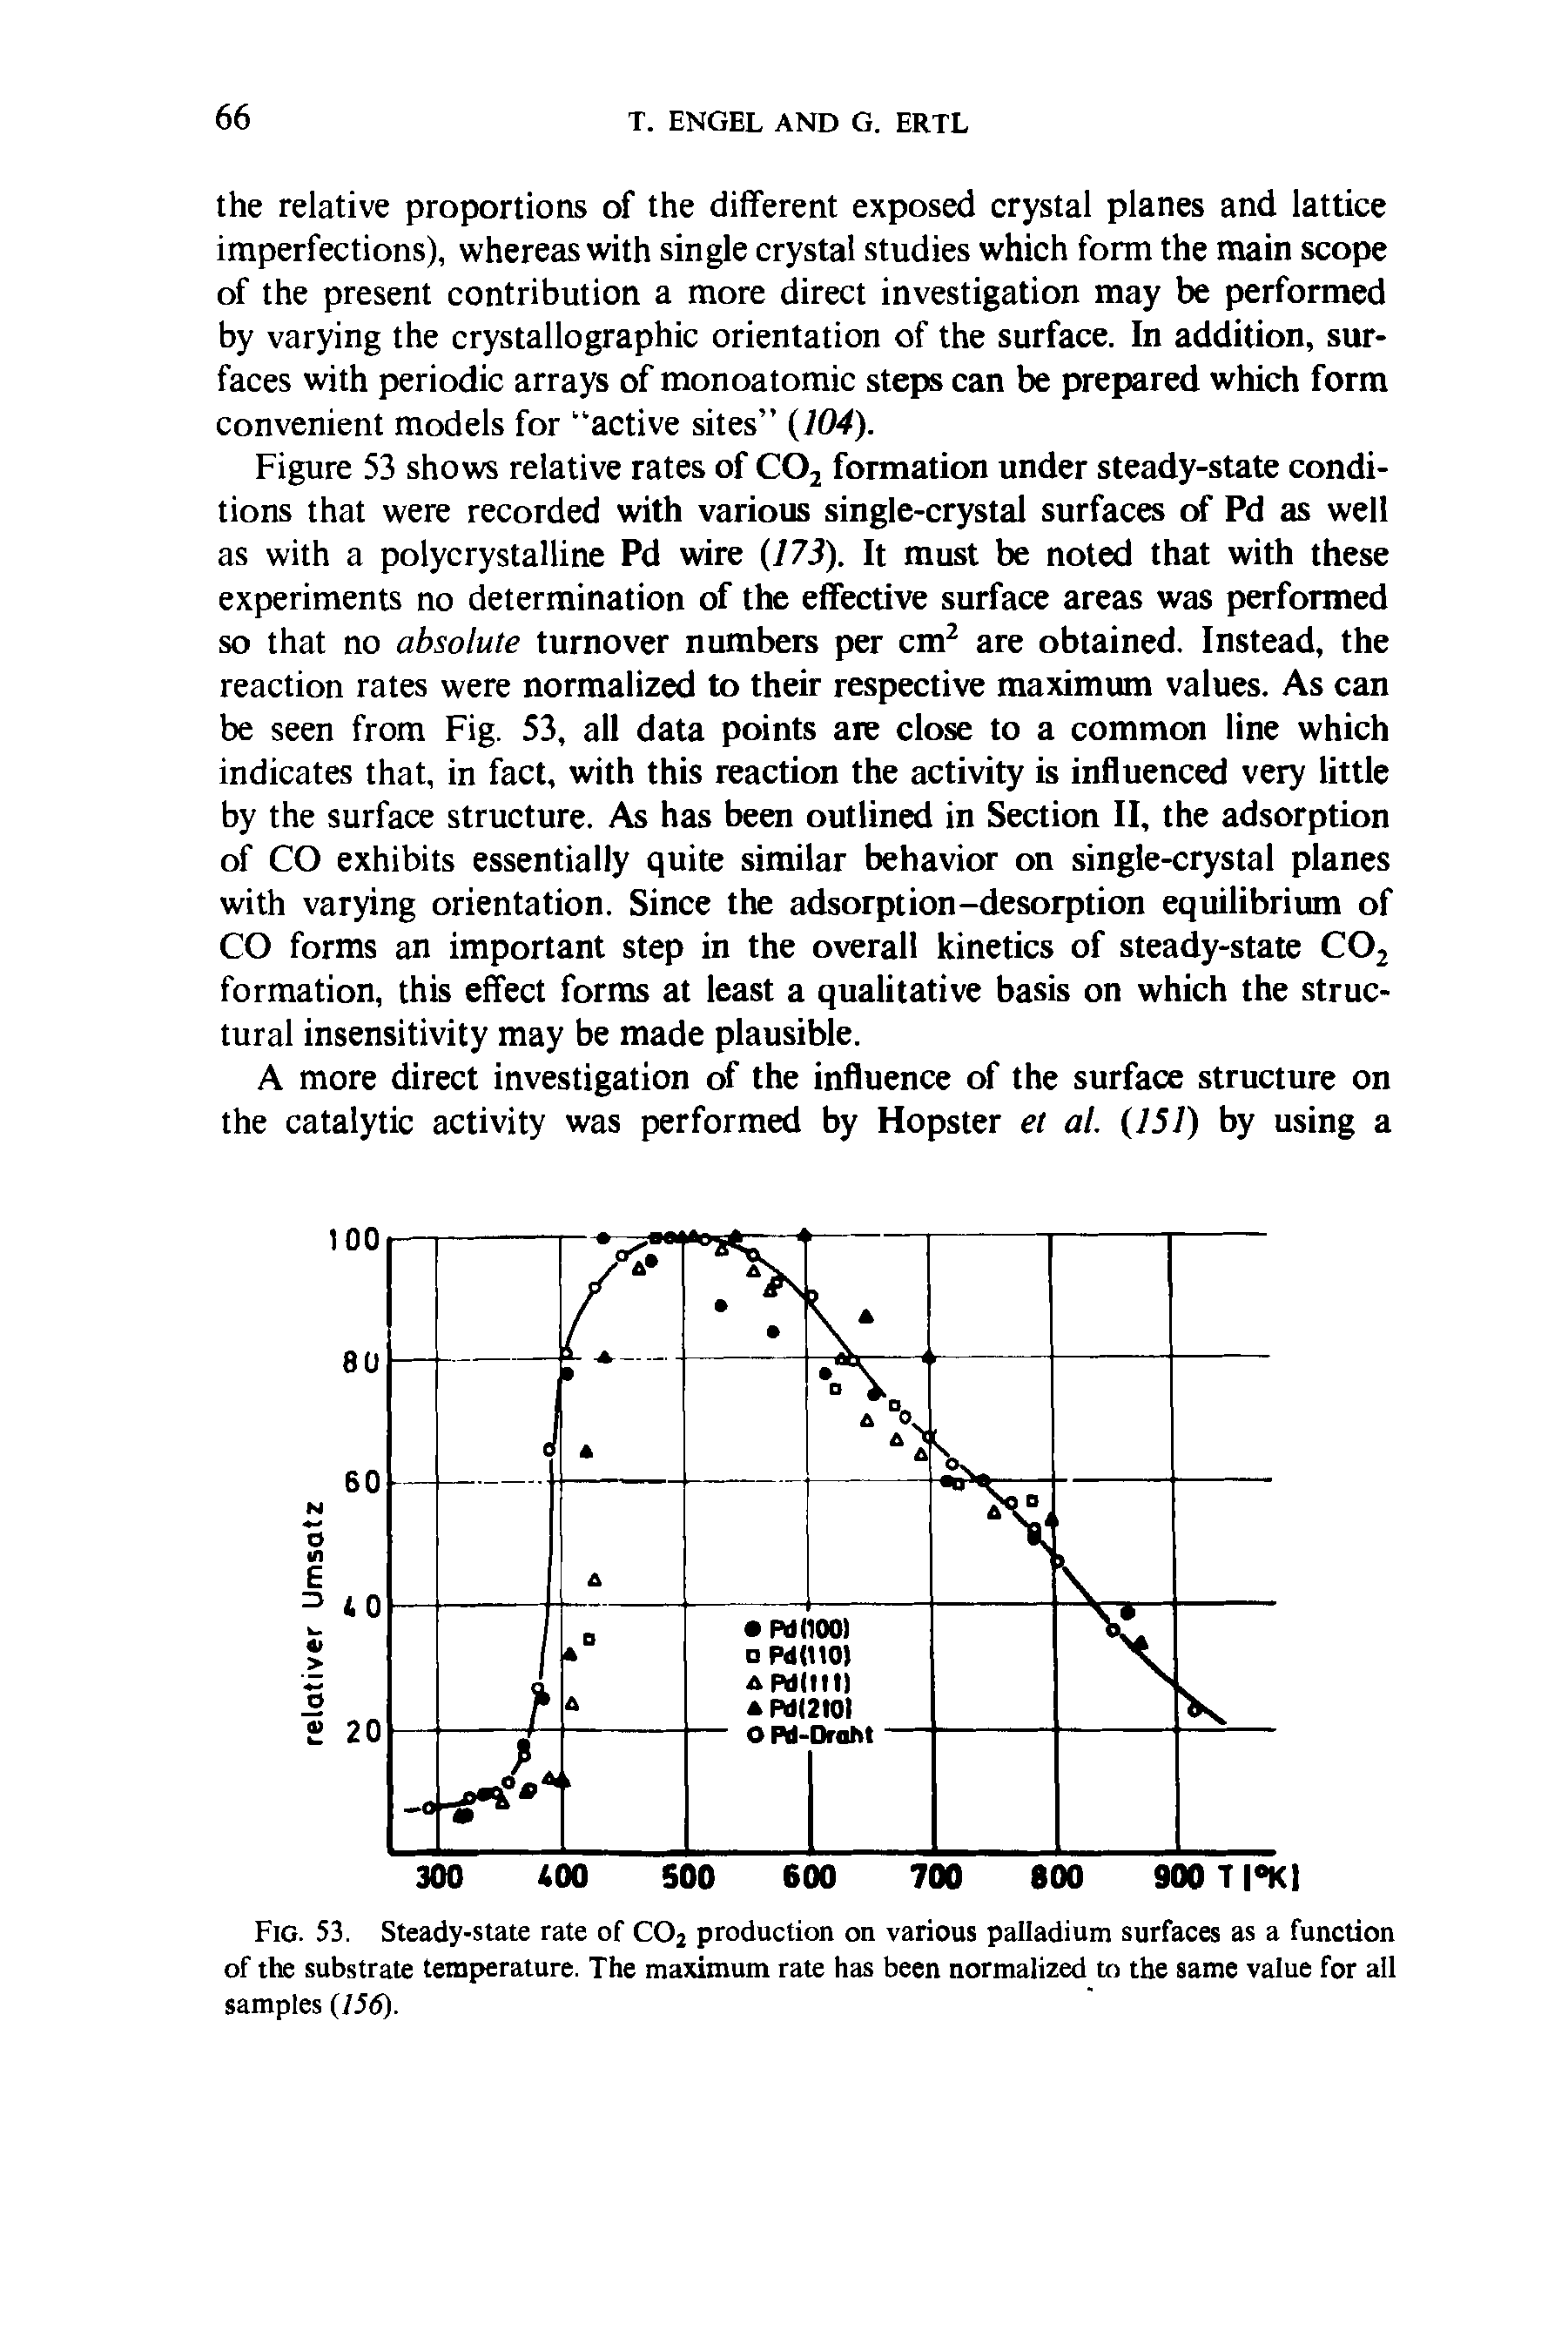 Fig. 53. Steady-state rate of C02 production on various palladium surfaces as a function of the substrate temperature. The maximum rate has been normalized to the same value for all samples (/5<5).